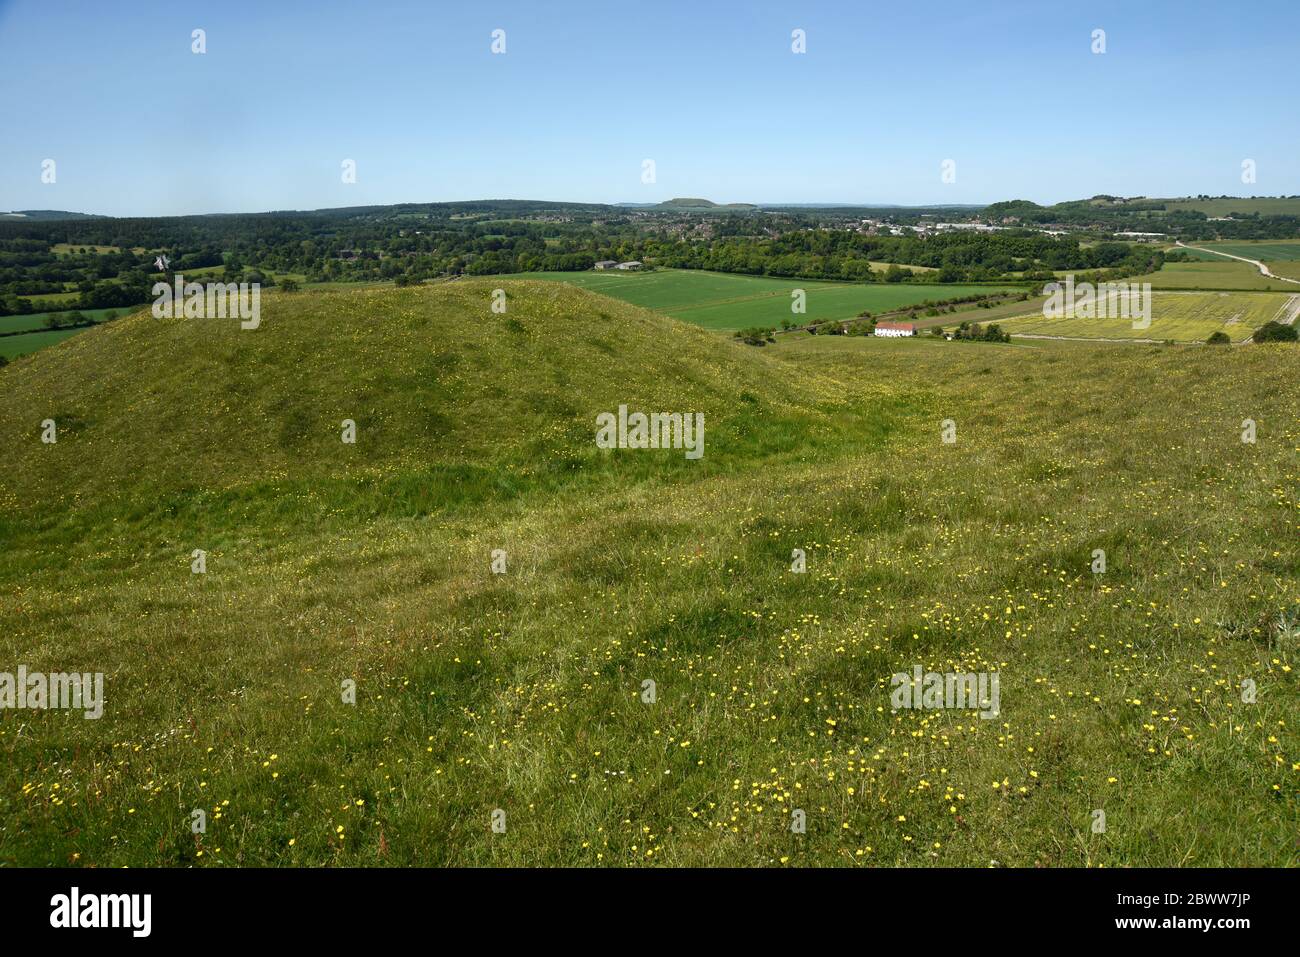 View toward Cley Hill from Scratchbury Camp,Hill Fort, Wiltshire, England, UK Stock Photo